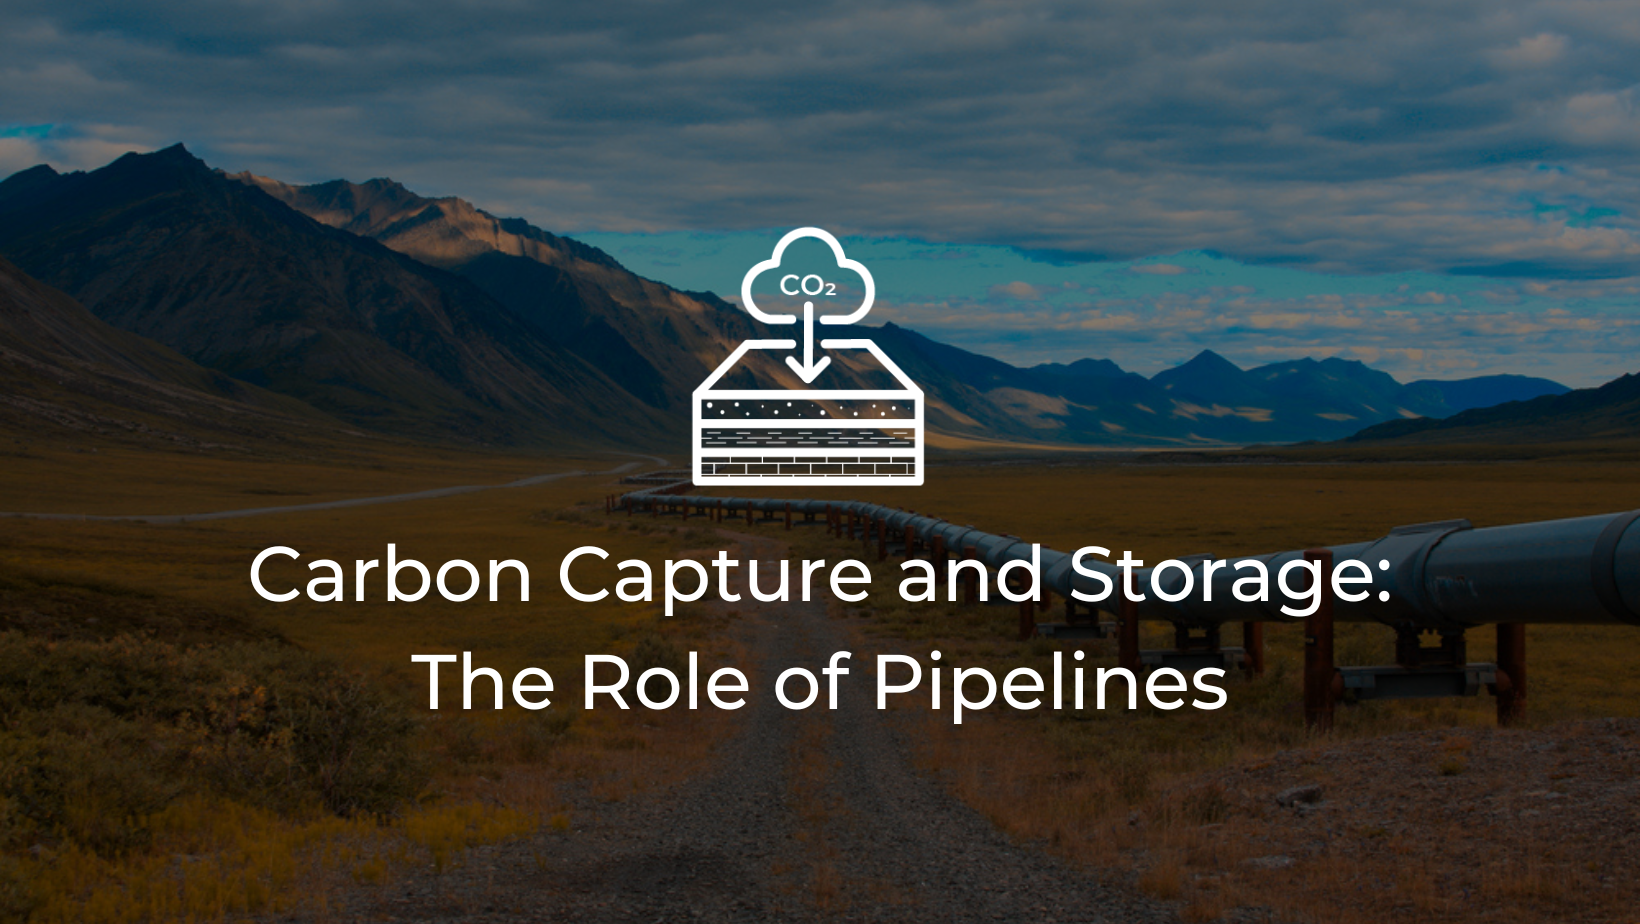 Carbon Capture and Storage: The Role of Pipelines